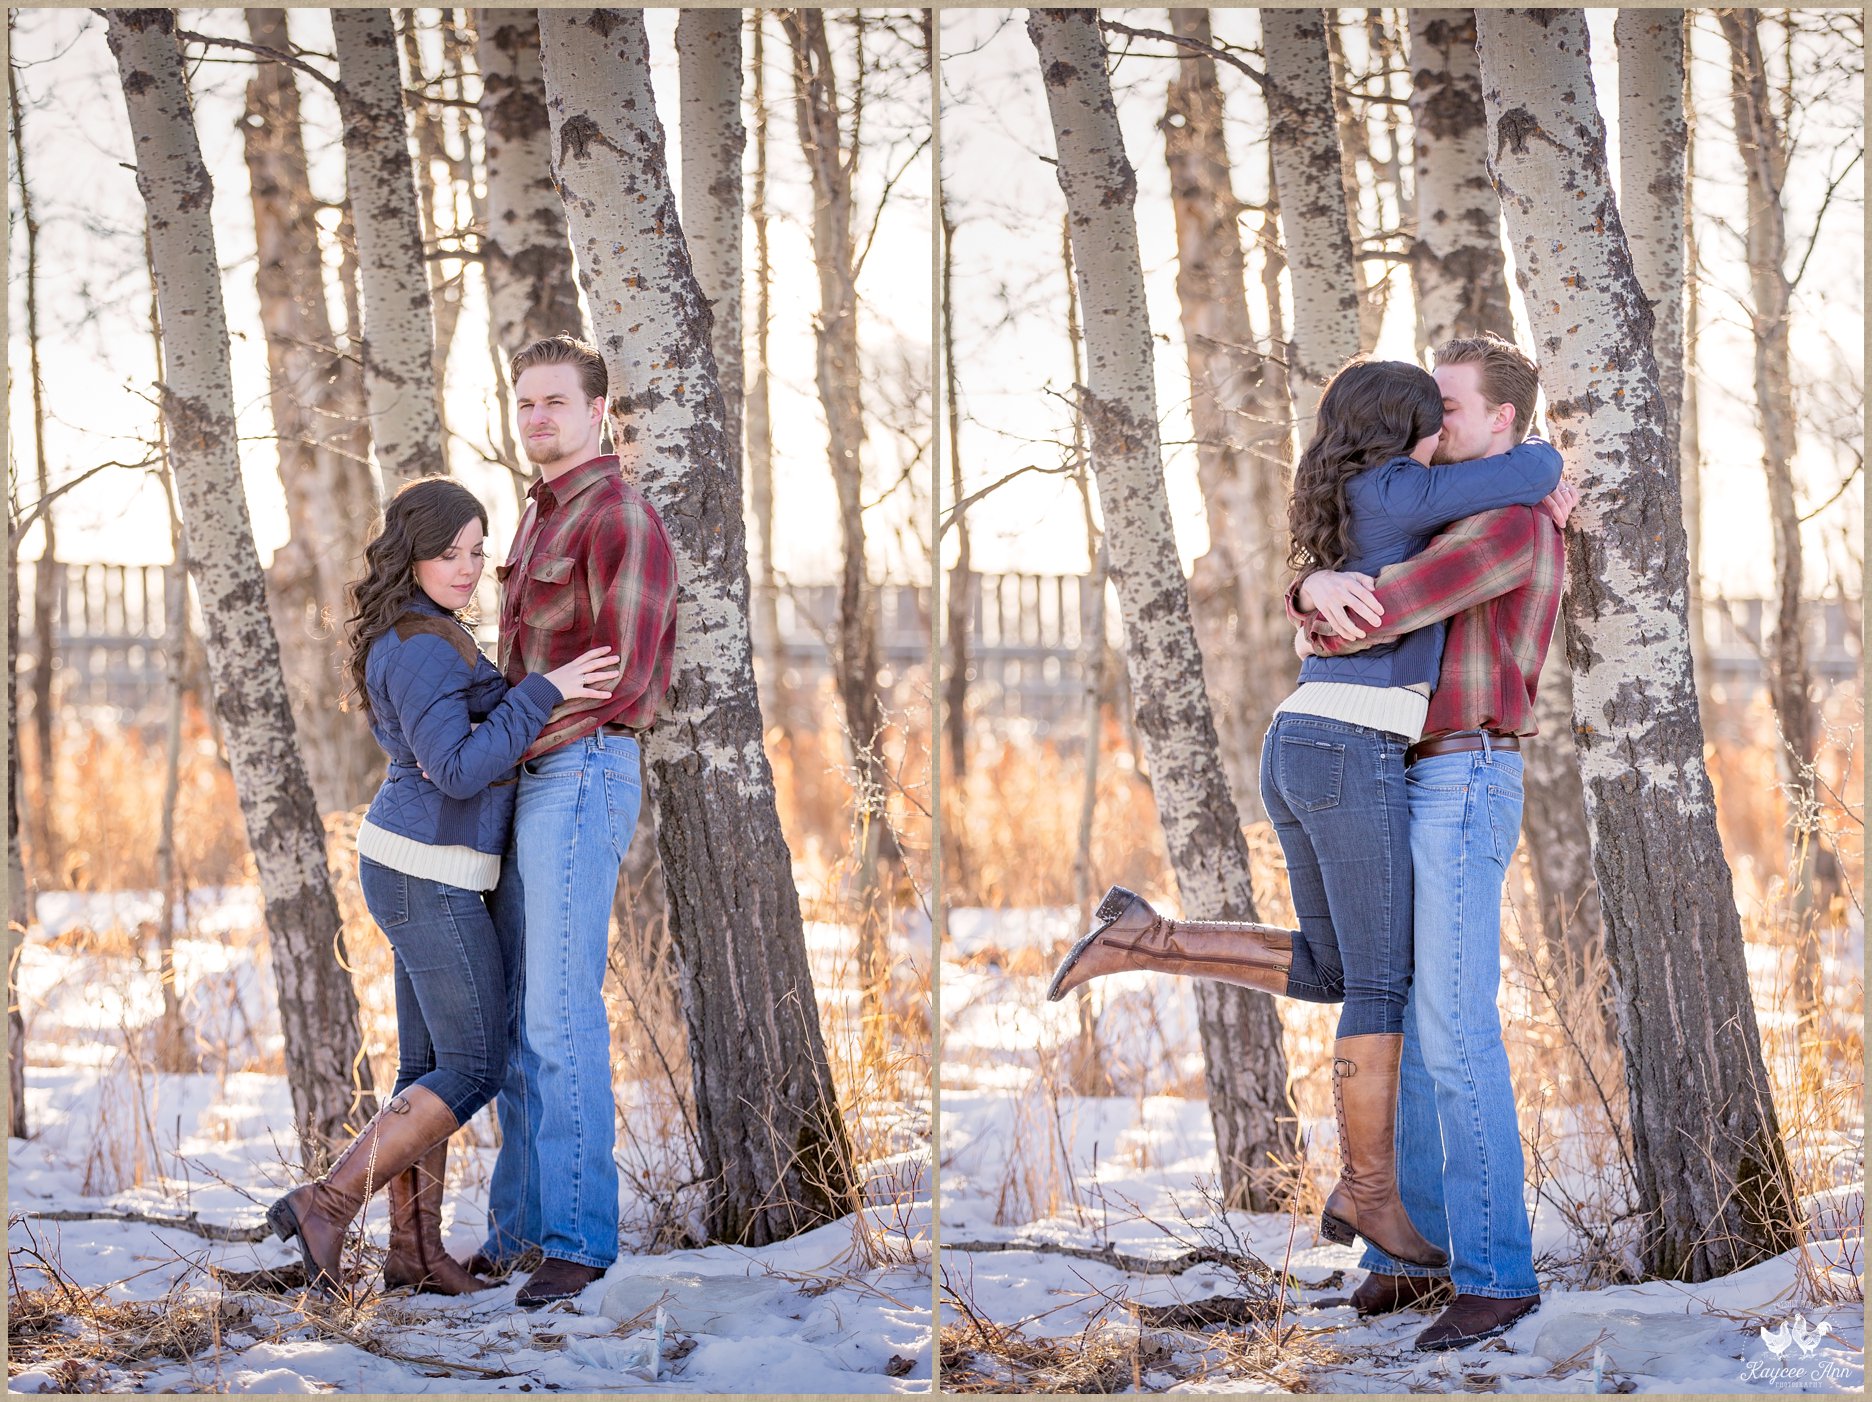 Lauren and Carter Cochrane Engagement by Kaycee Ann Photography